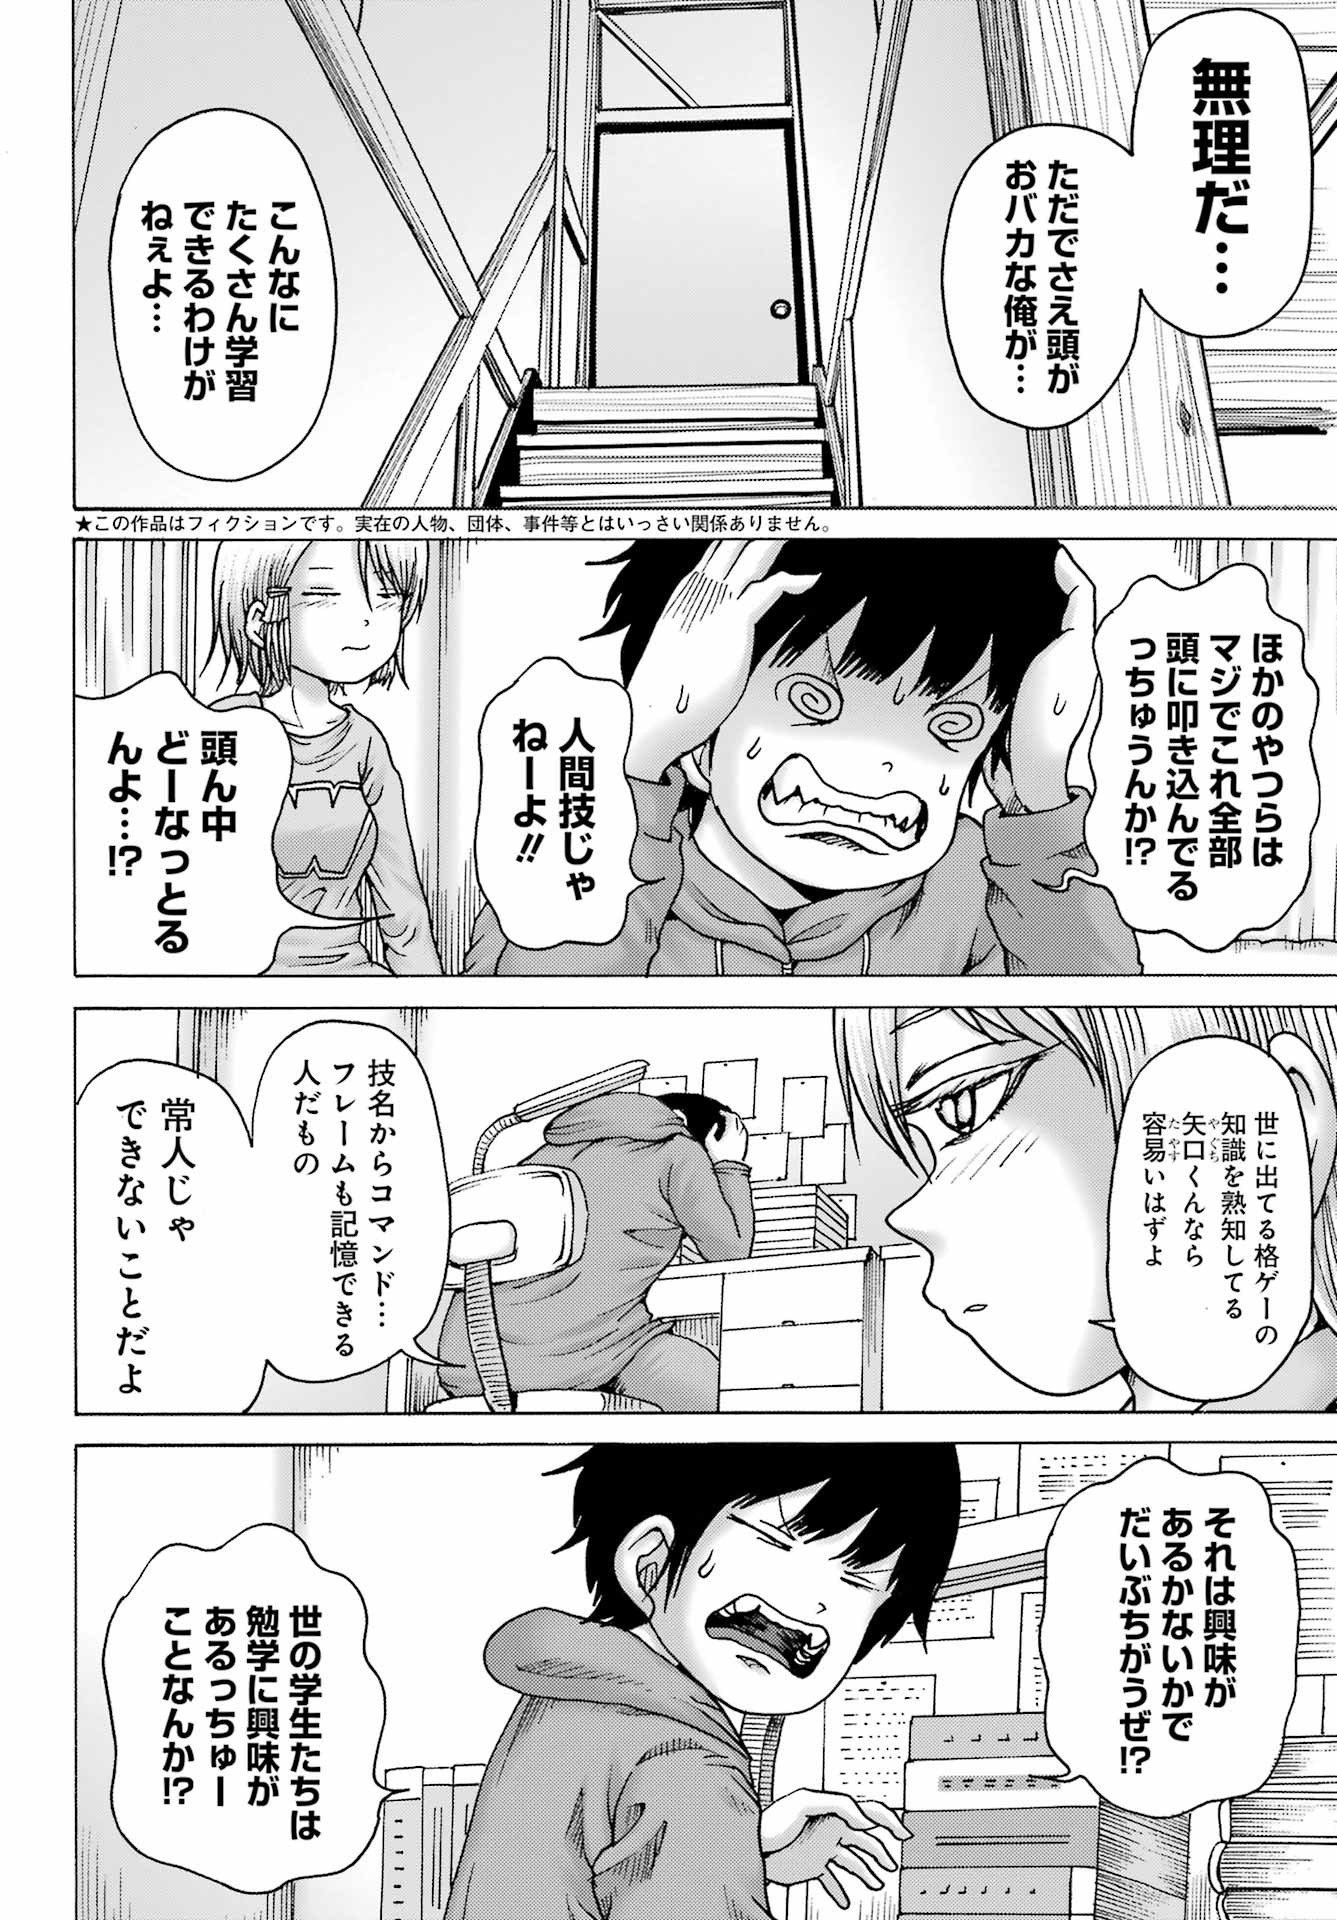 High Score Girl DASH - Chapter 37 - Page 2